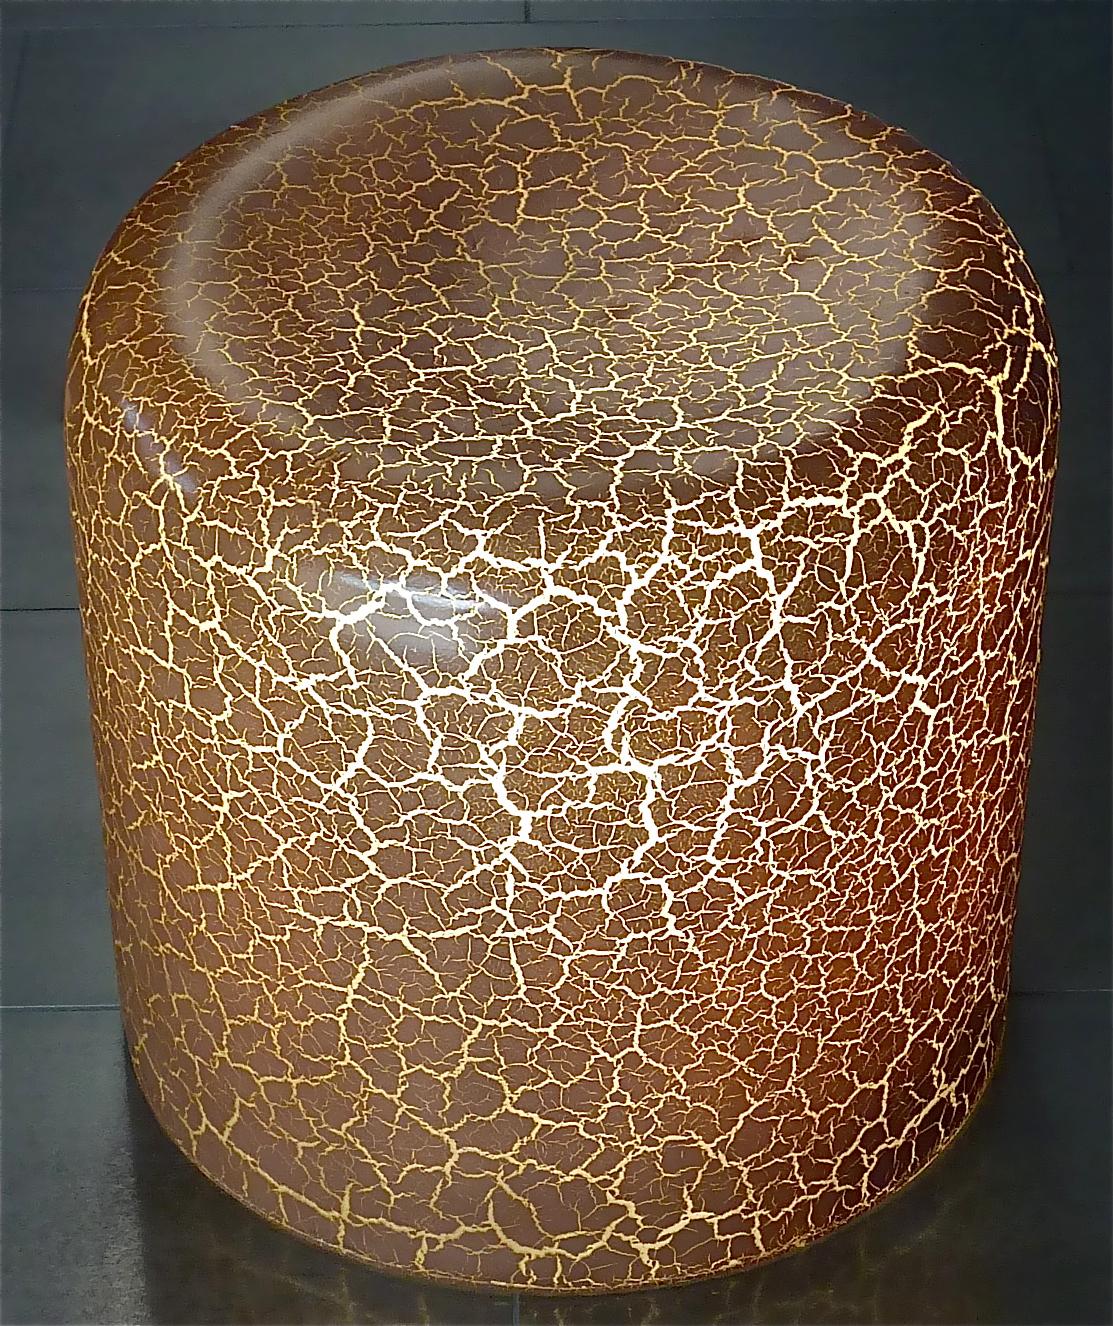 Unique sculptural illuminated stool or light sculpture object, France, Italy or Germany around 1960s to 1970s. The cool Mid-century organic design stool is made of epoxy resin / acrylic plastic with a caramel brown crackle marble stone or animal